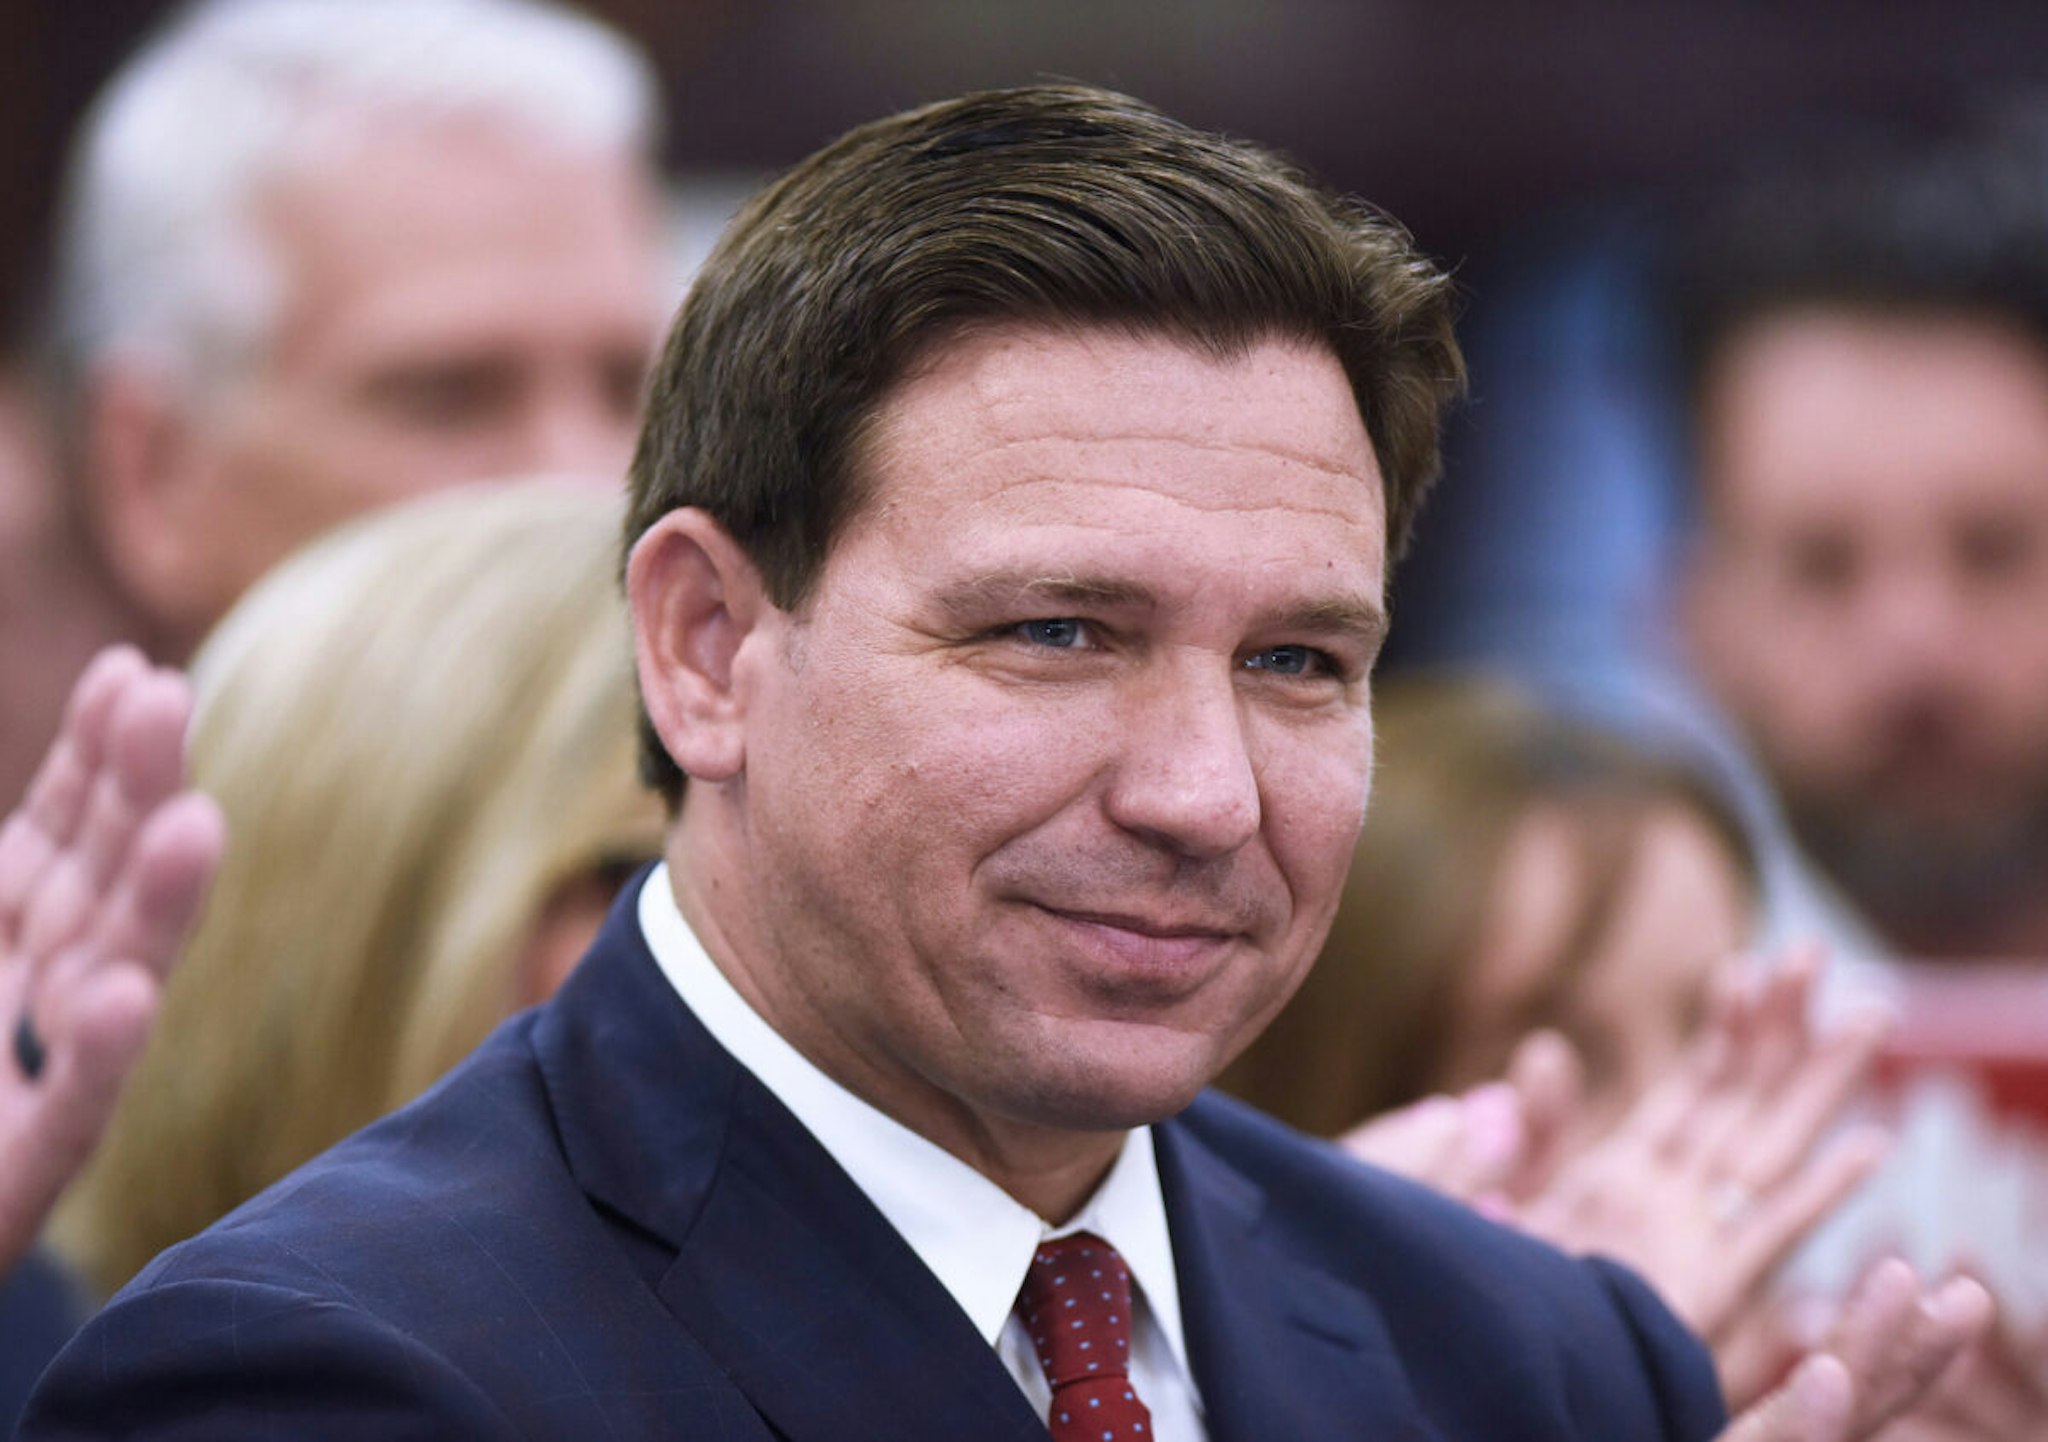 Florida Governor Ron DeSantis listens to a speaker at a press conference at Club in Ocala, where he signed into law more than $1.2 billion in tax relief for Floridians, the largest tax relief package in Florida